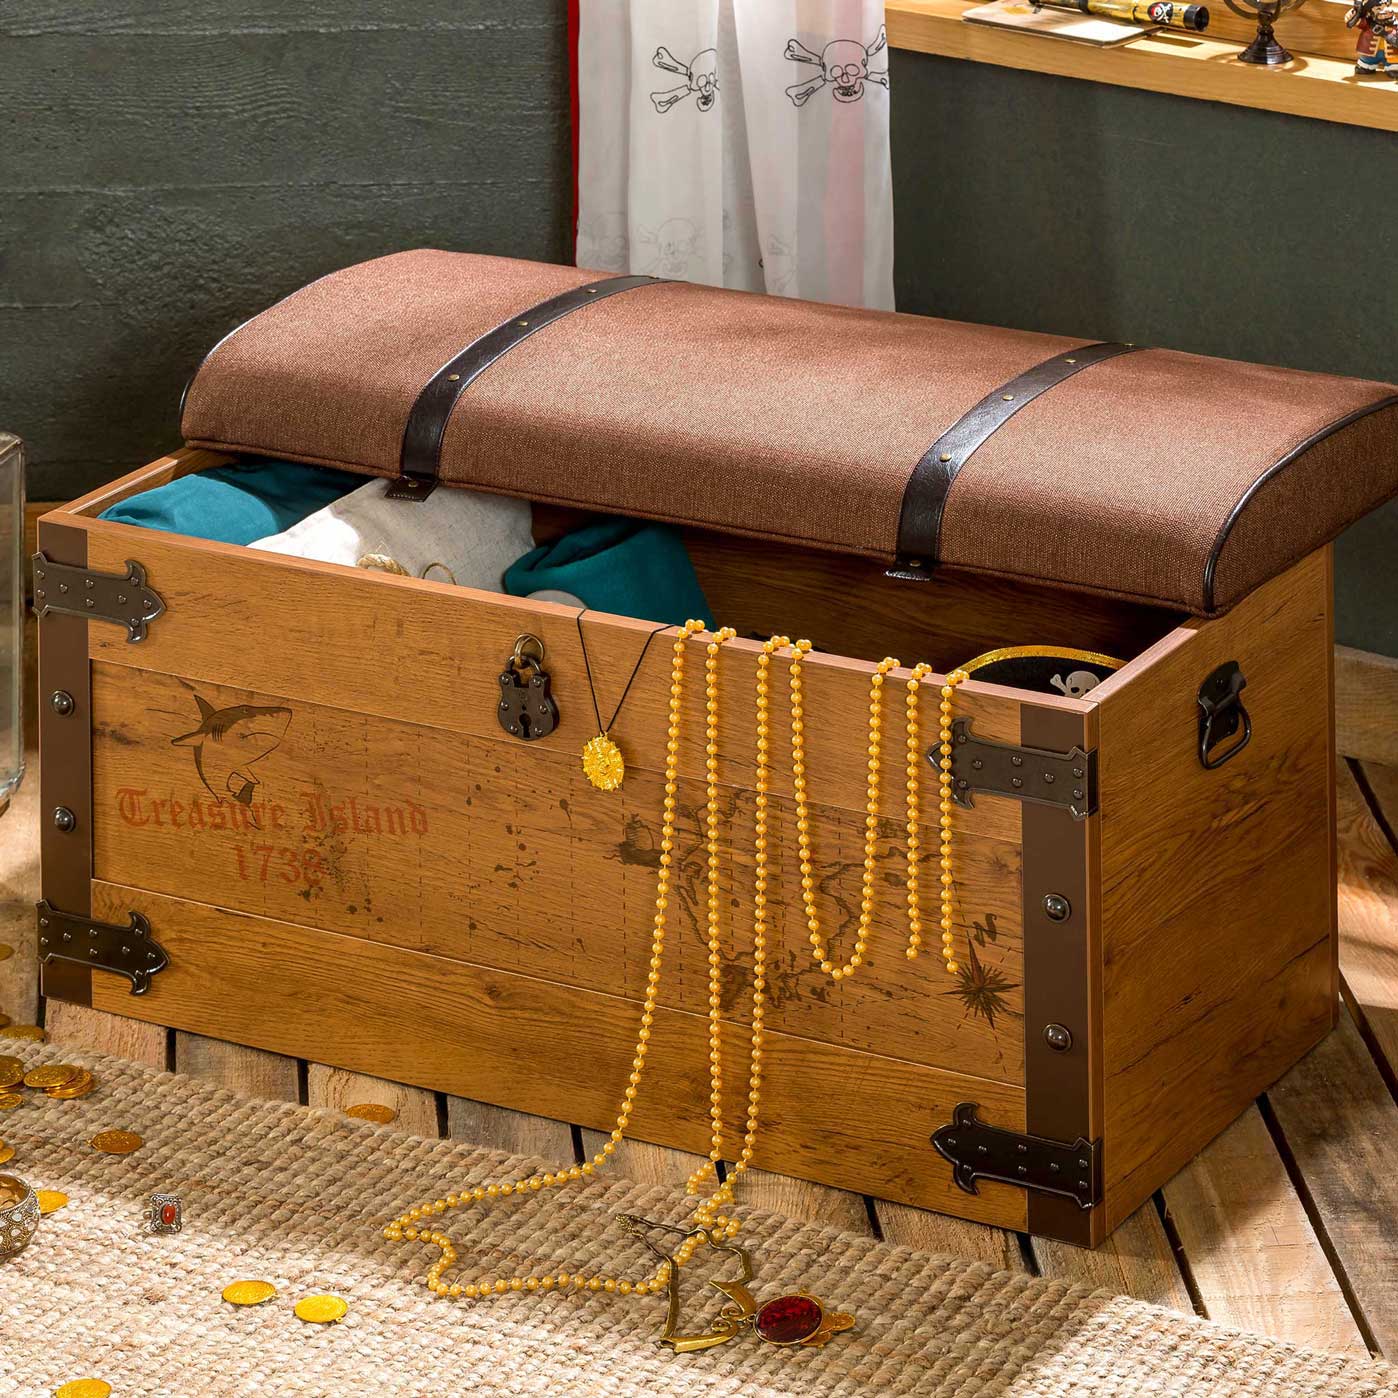 Pirate Toy Storage Bench with Cushion